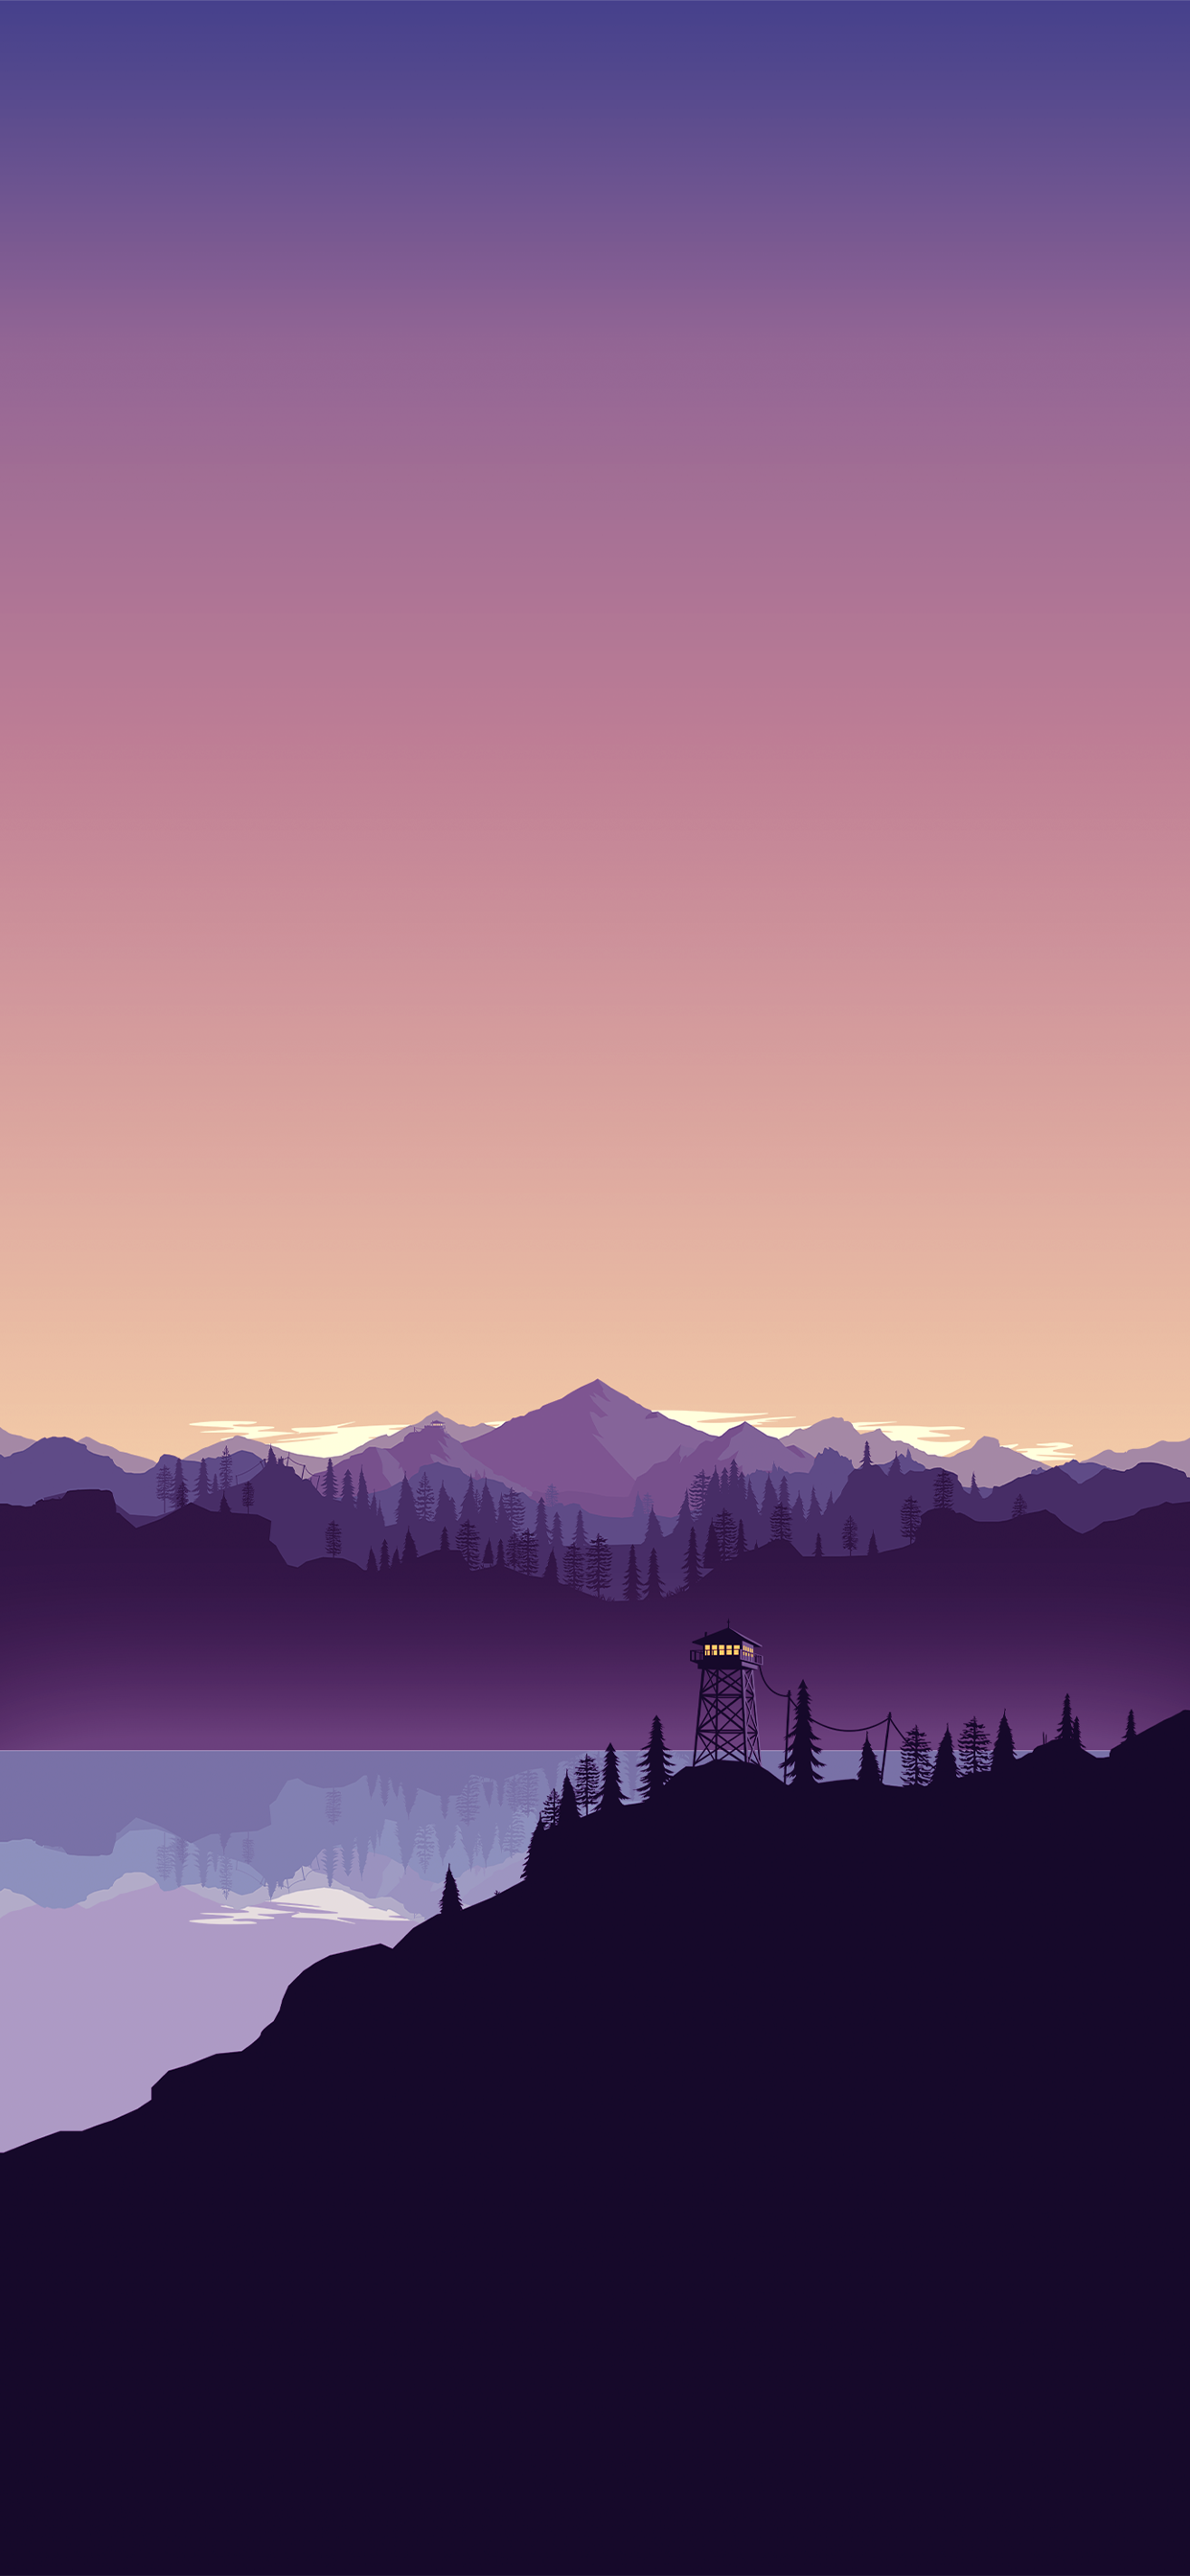 Colorful vector landscape wallpaper for iPhone